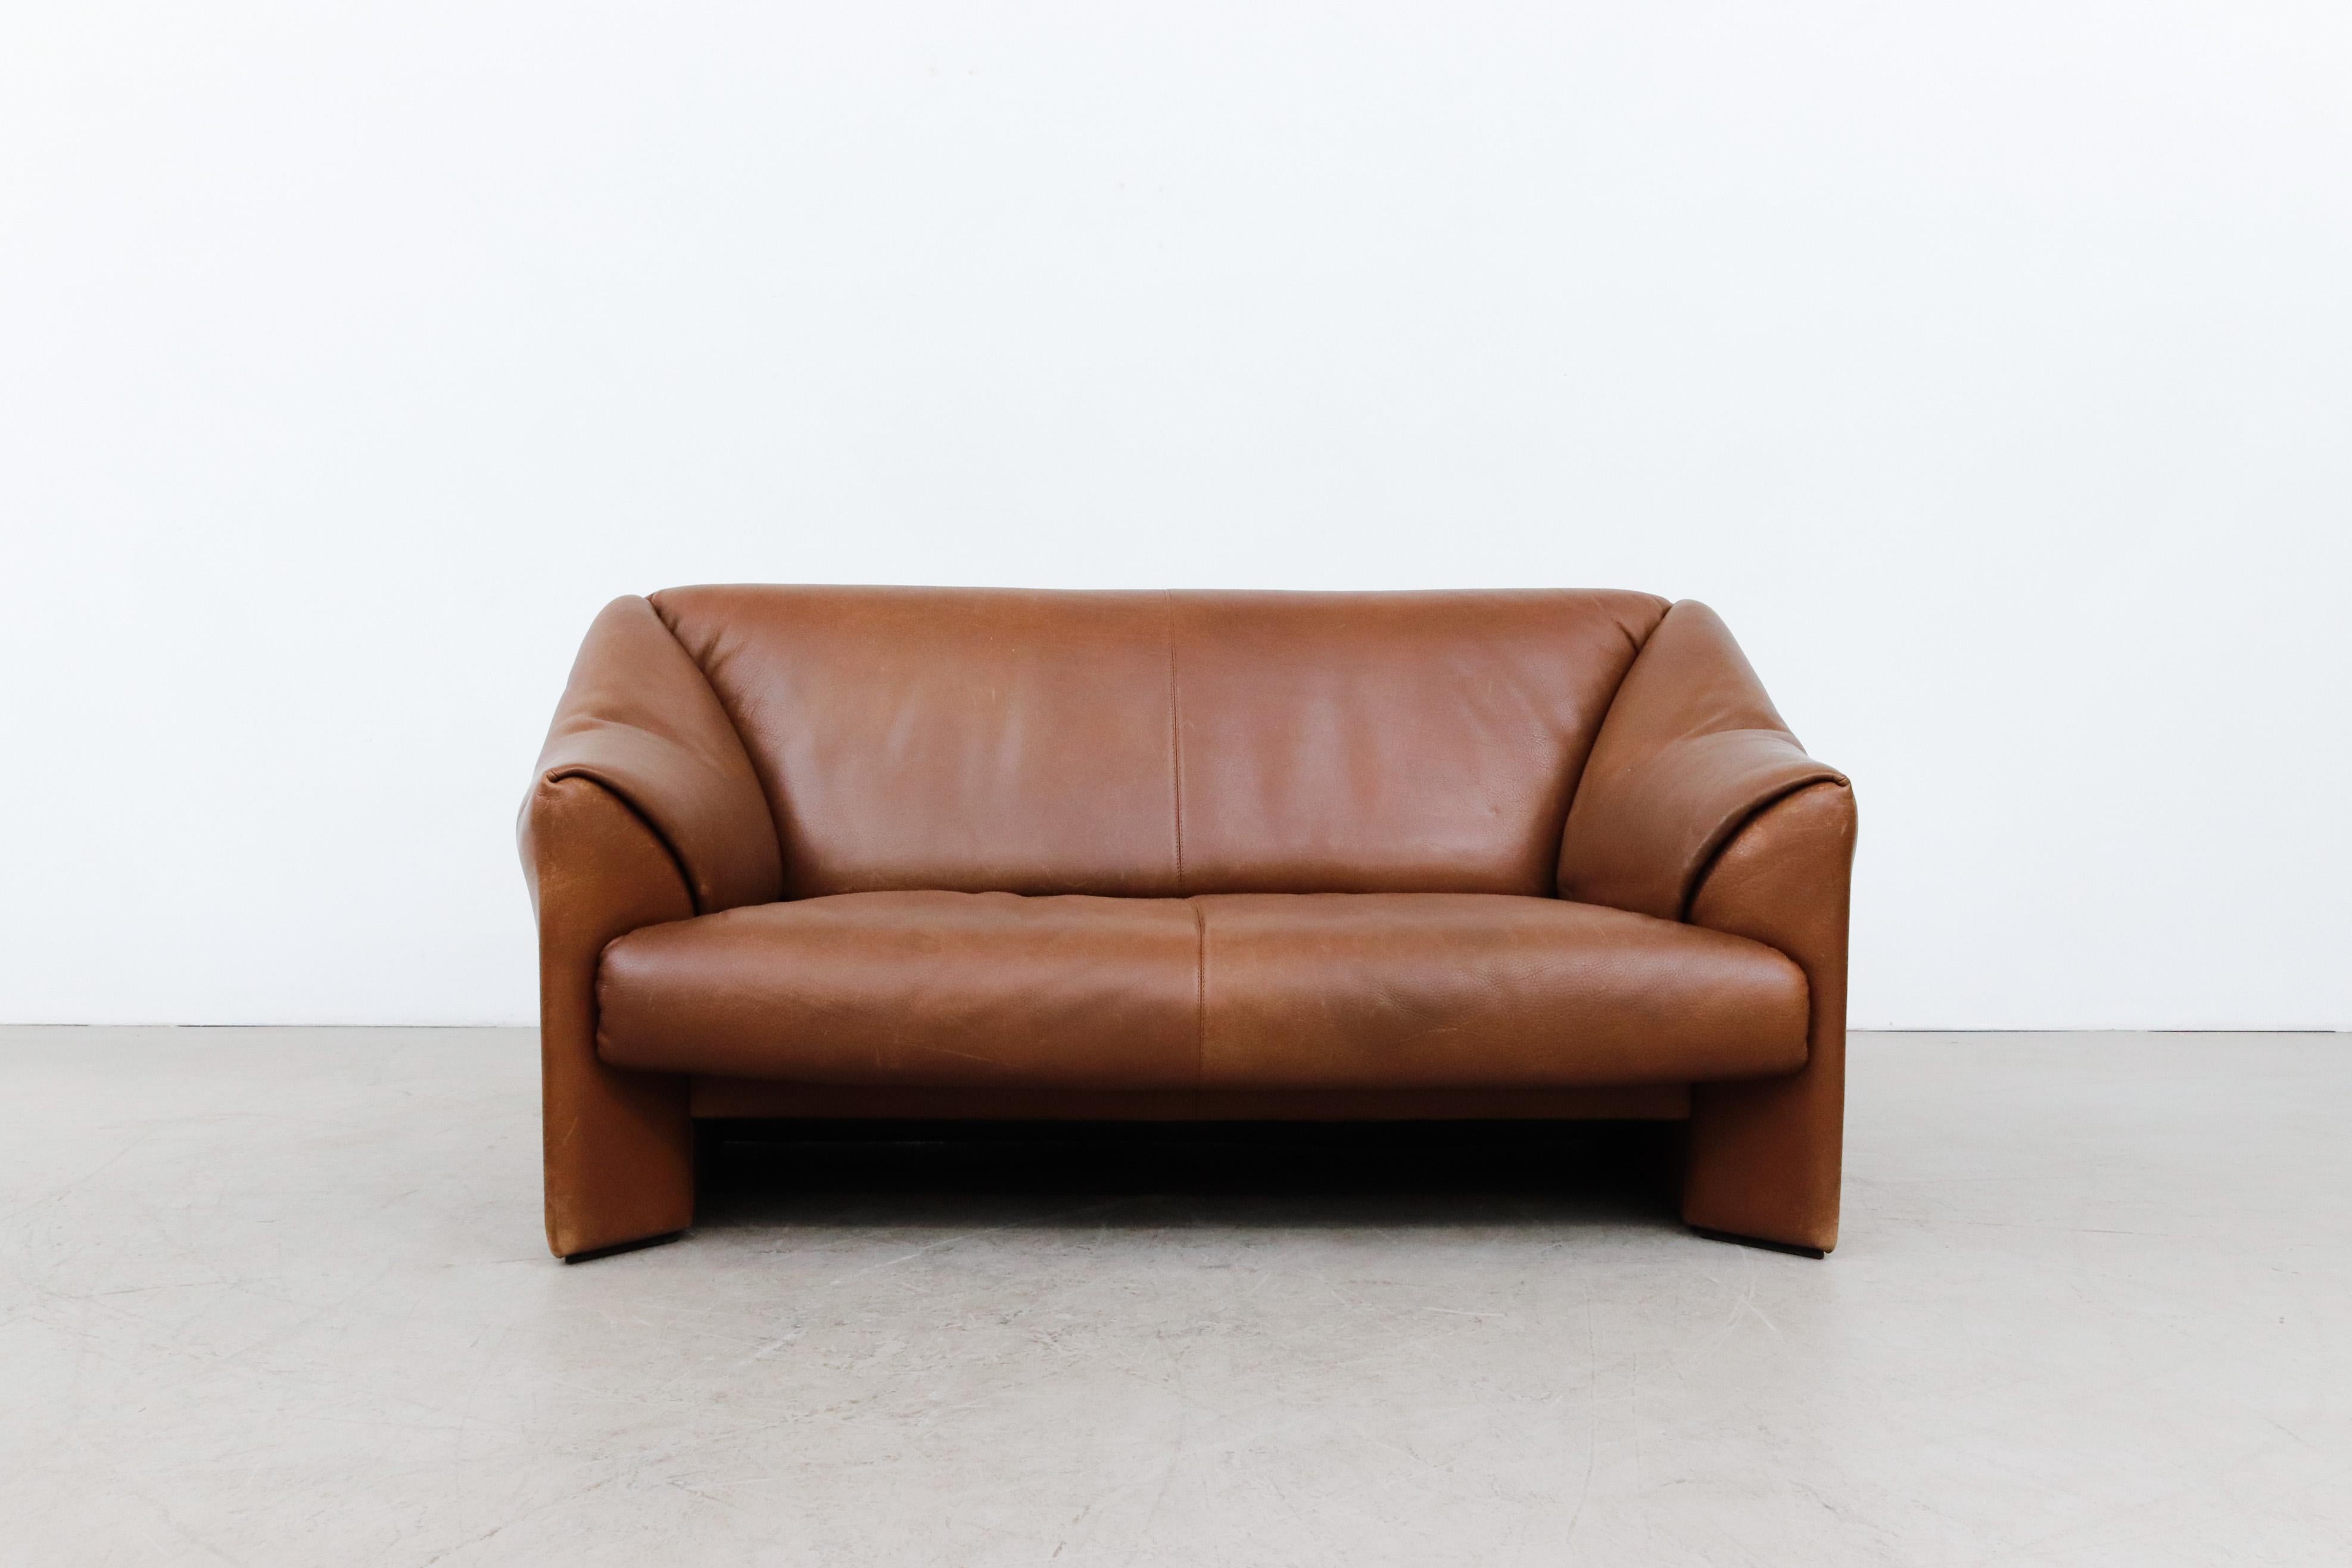 Handsome Leolux Buffalo leather 'DS47' style loveseat in original condition with normal wear and visible patina. Some imprints in leather from transport that should reduce over time. Wear is consistent with its Age and Use.